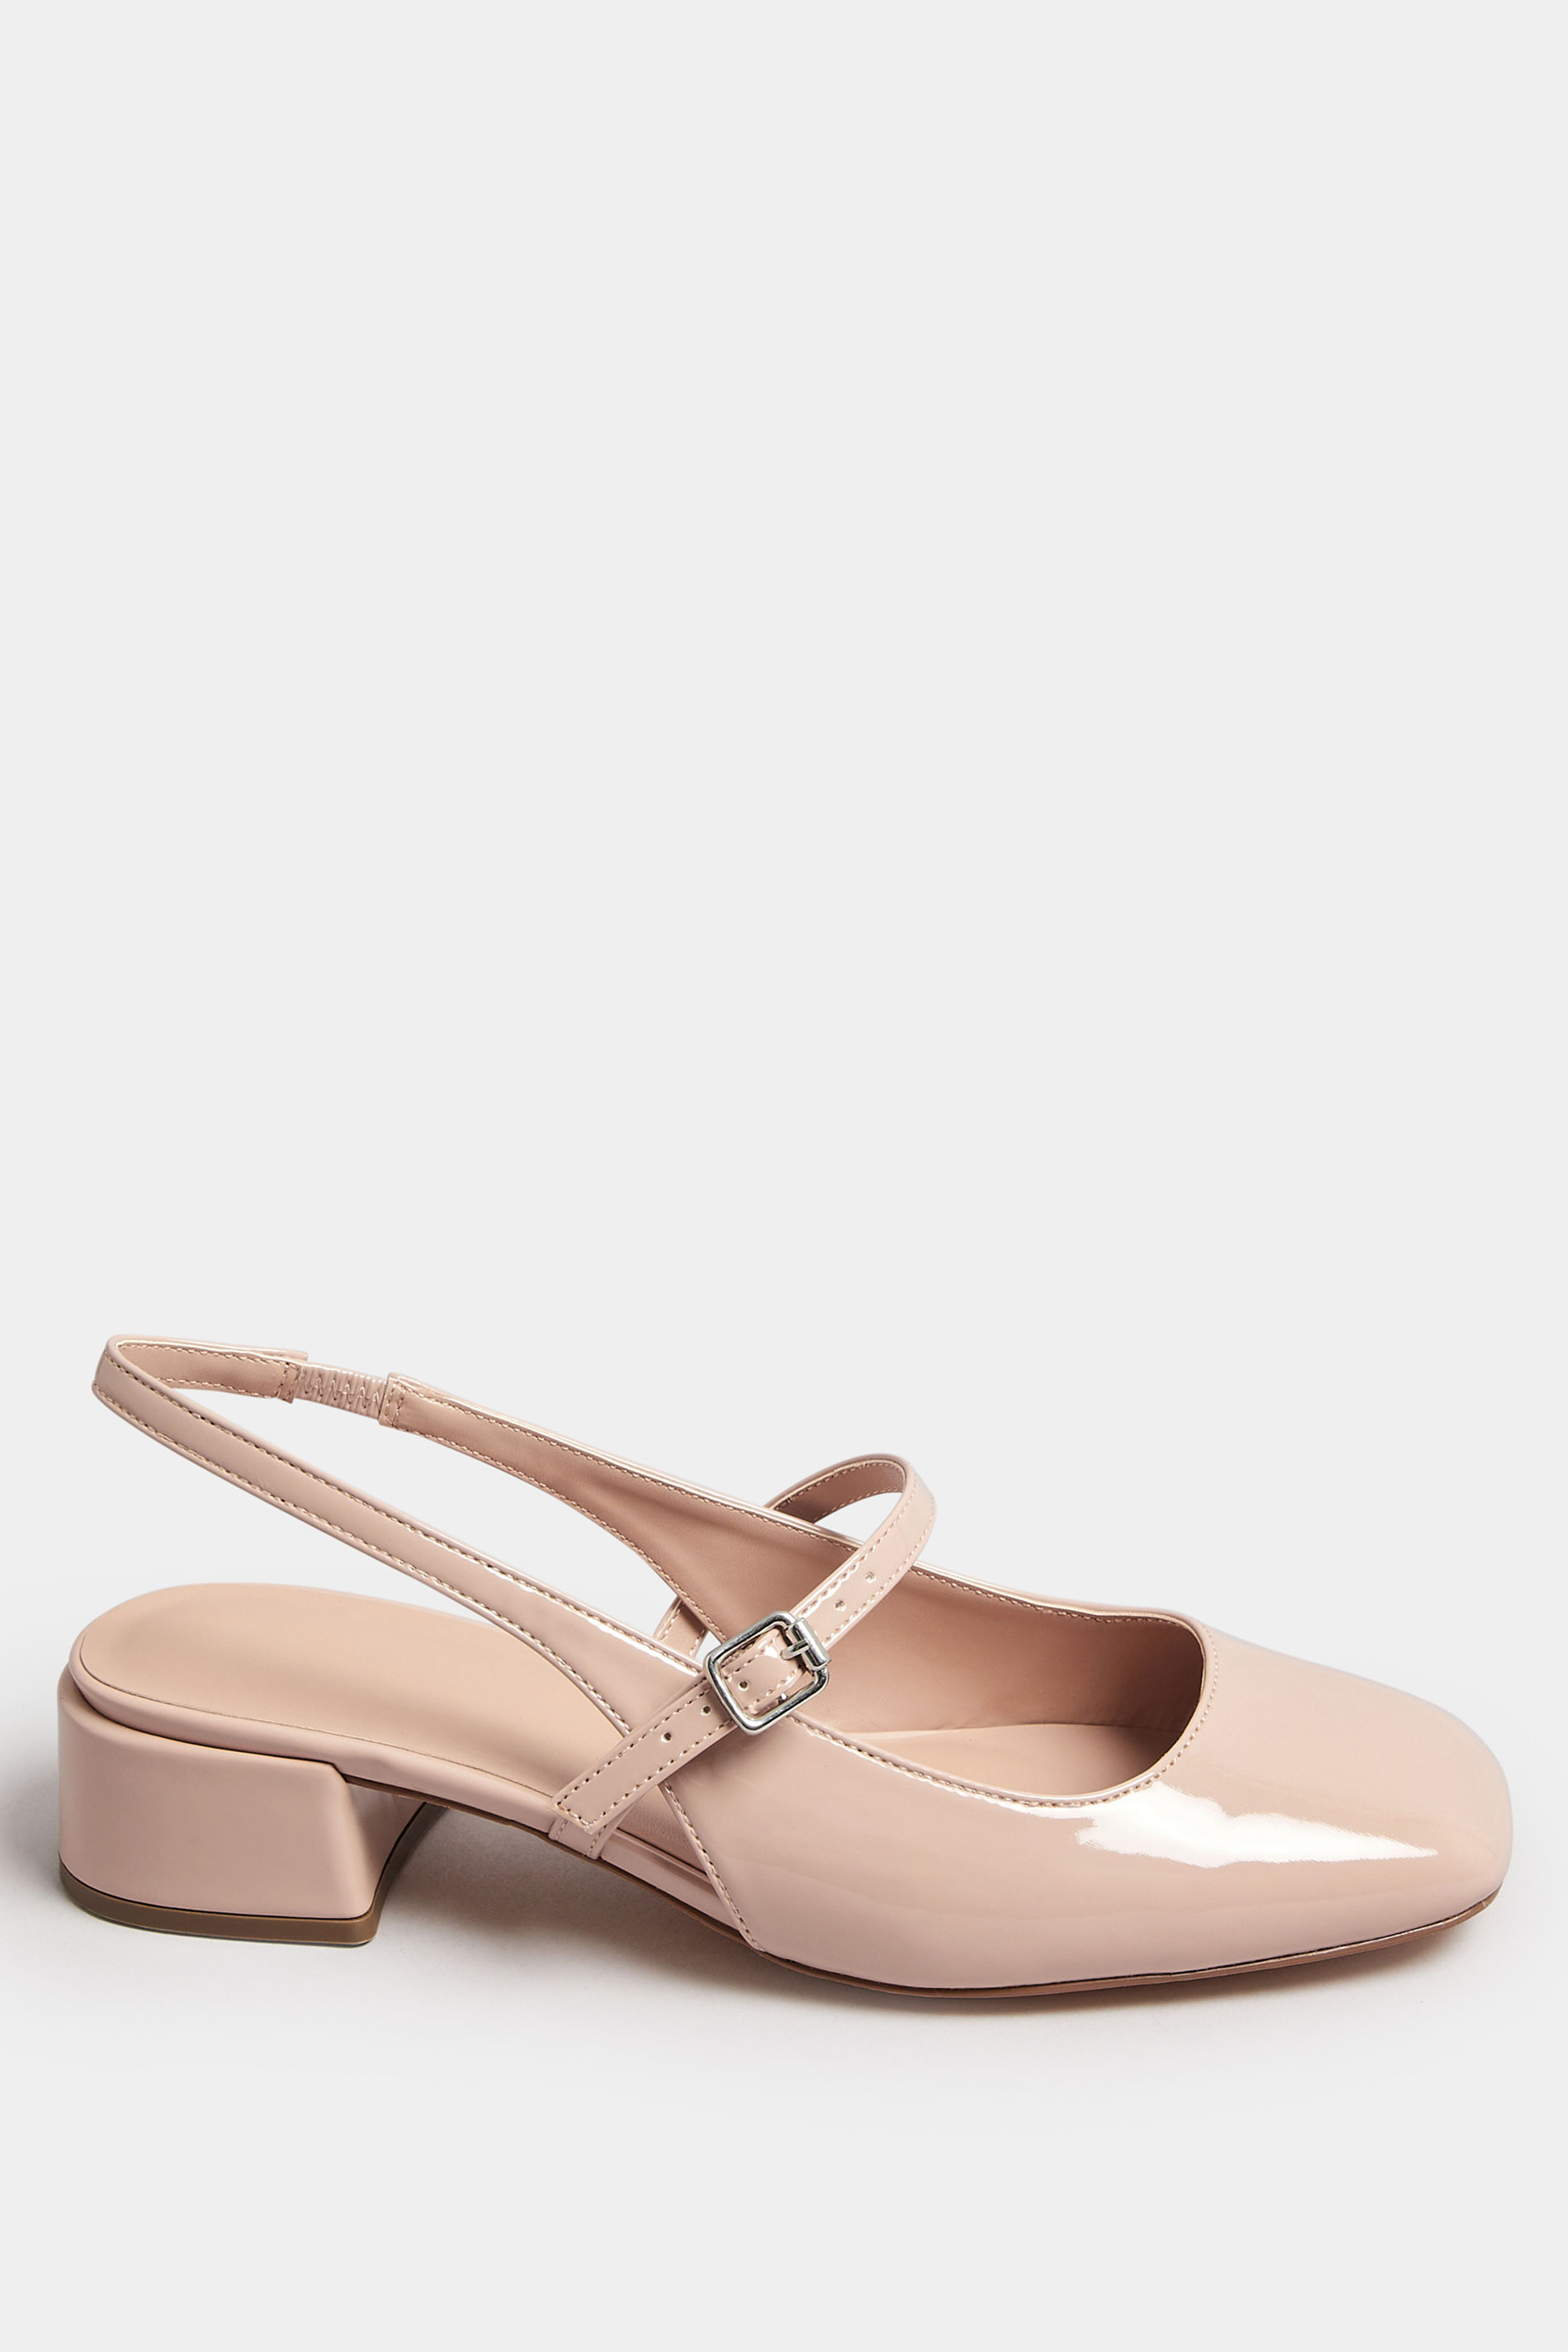 Nude Patent Mary Jane Slingback Heels In Extra Wide EEE Fit | Yours Clothing 3